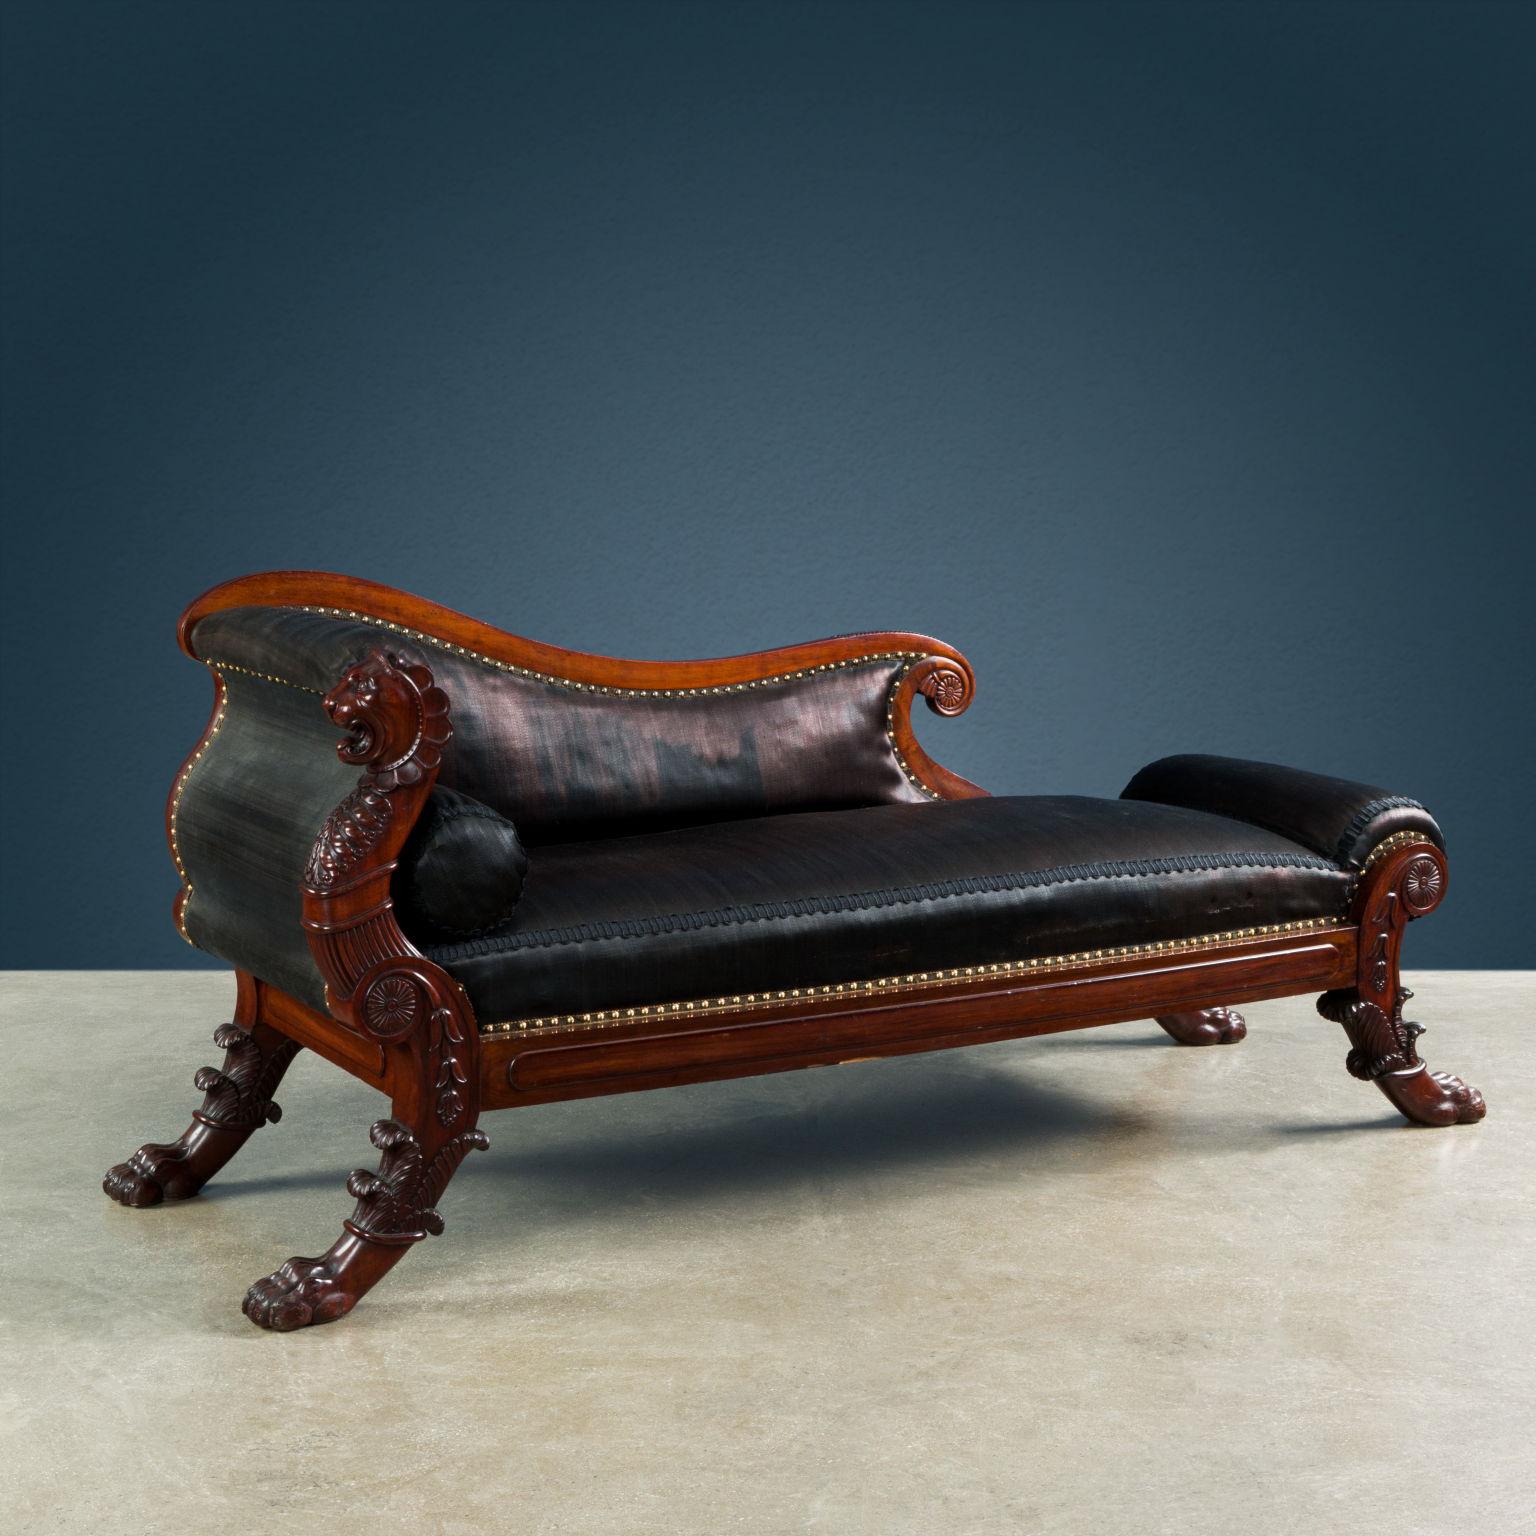 Center triclinium sofa, made of mahogany and upholstered in black horsehair fabric. The saber feet are carved in the form of a lion's paw swathed in acanthus leaves from which sprouts a volute decorated with rosettes and bellflowers; the front